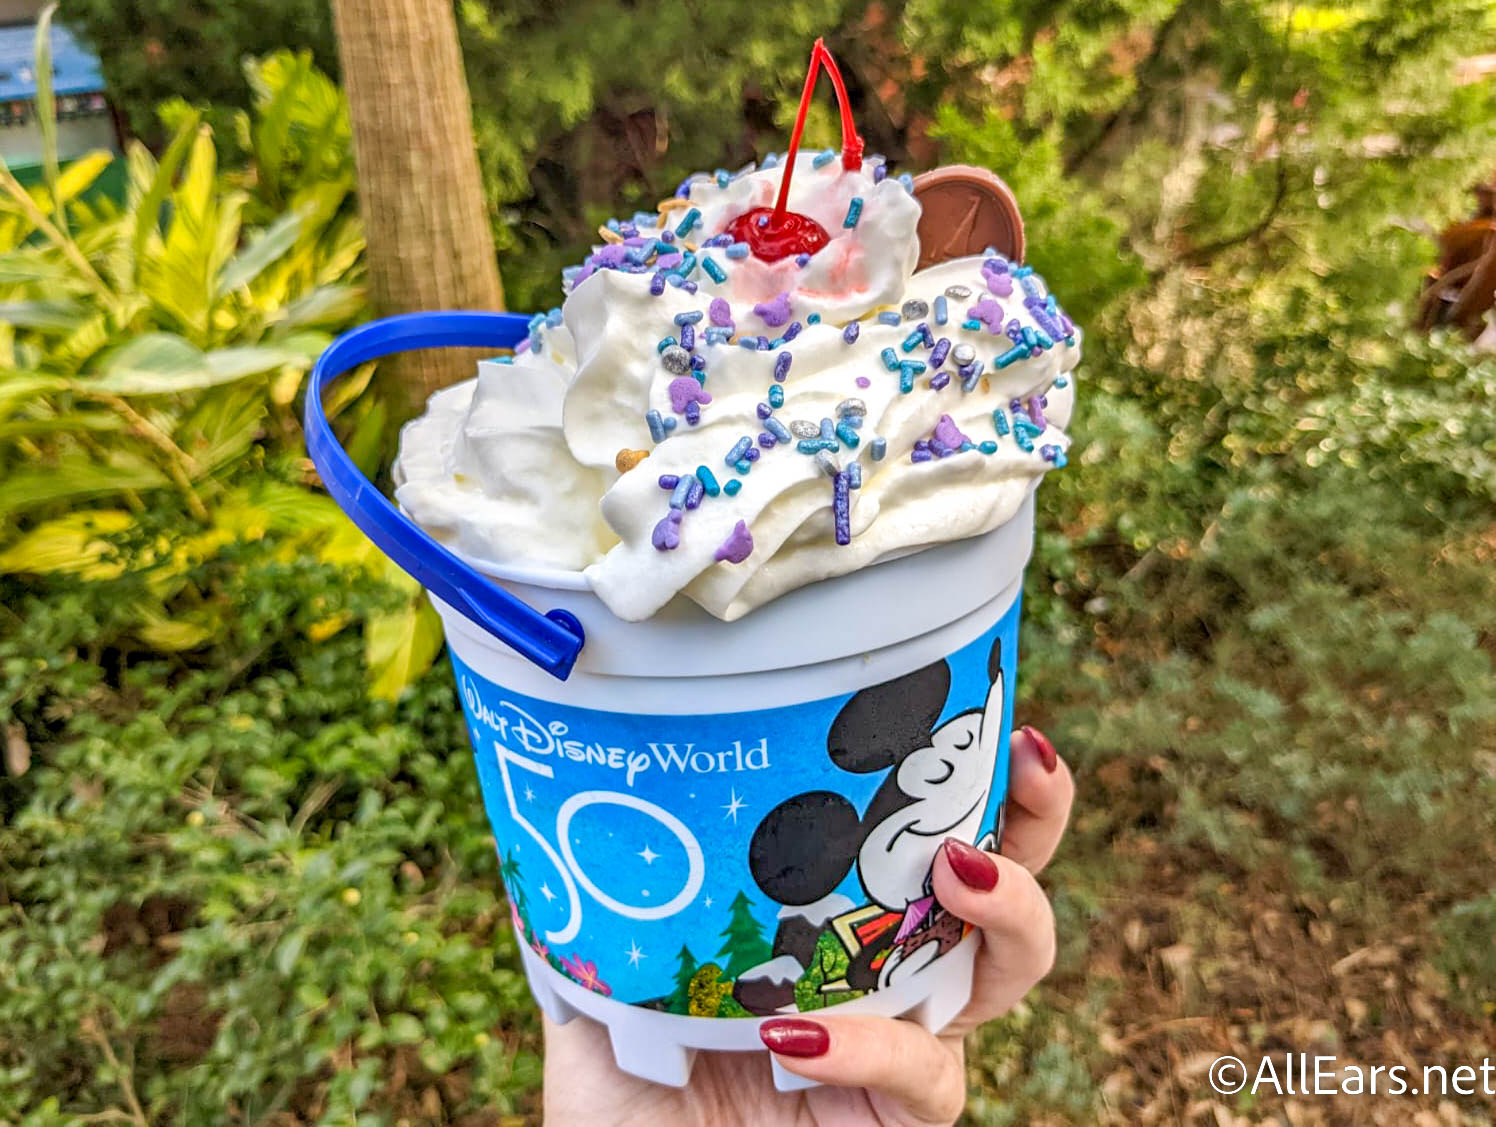 https://allears.net/wp-content/uploads/2022/11/2022-wdw-blizzard-beach-water-park-i-c-expeditions-ice-cream-sand-pail-sundae-3-2.jpg